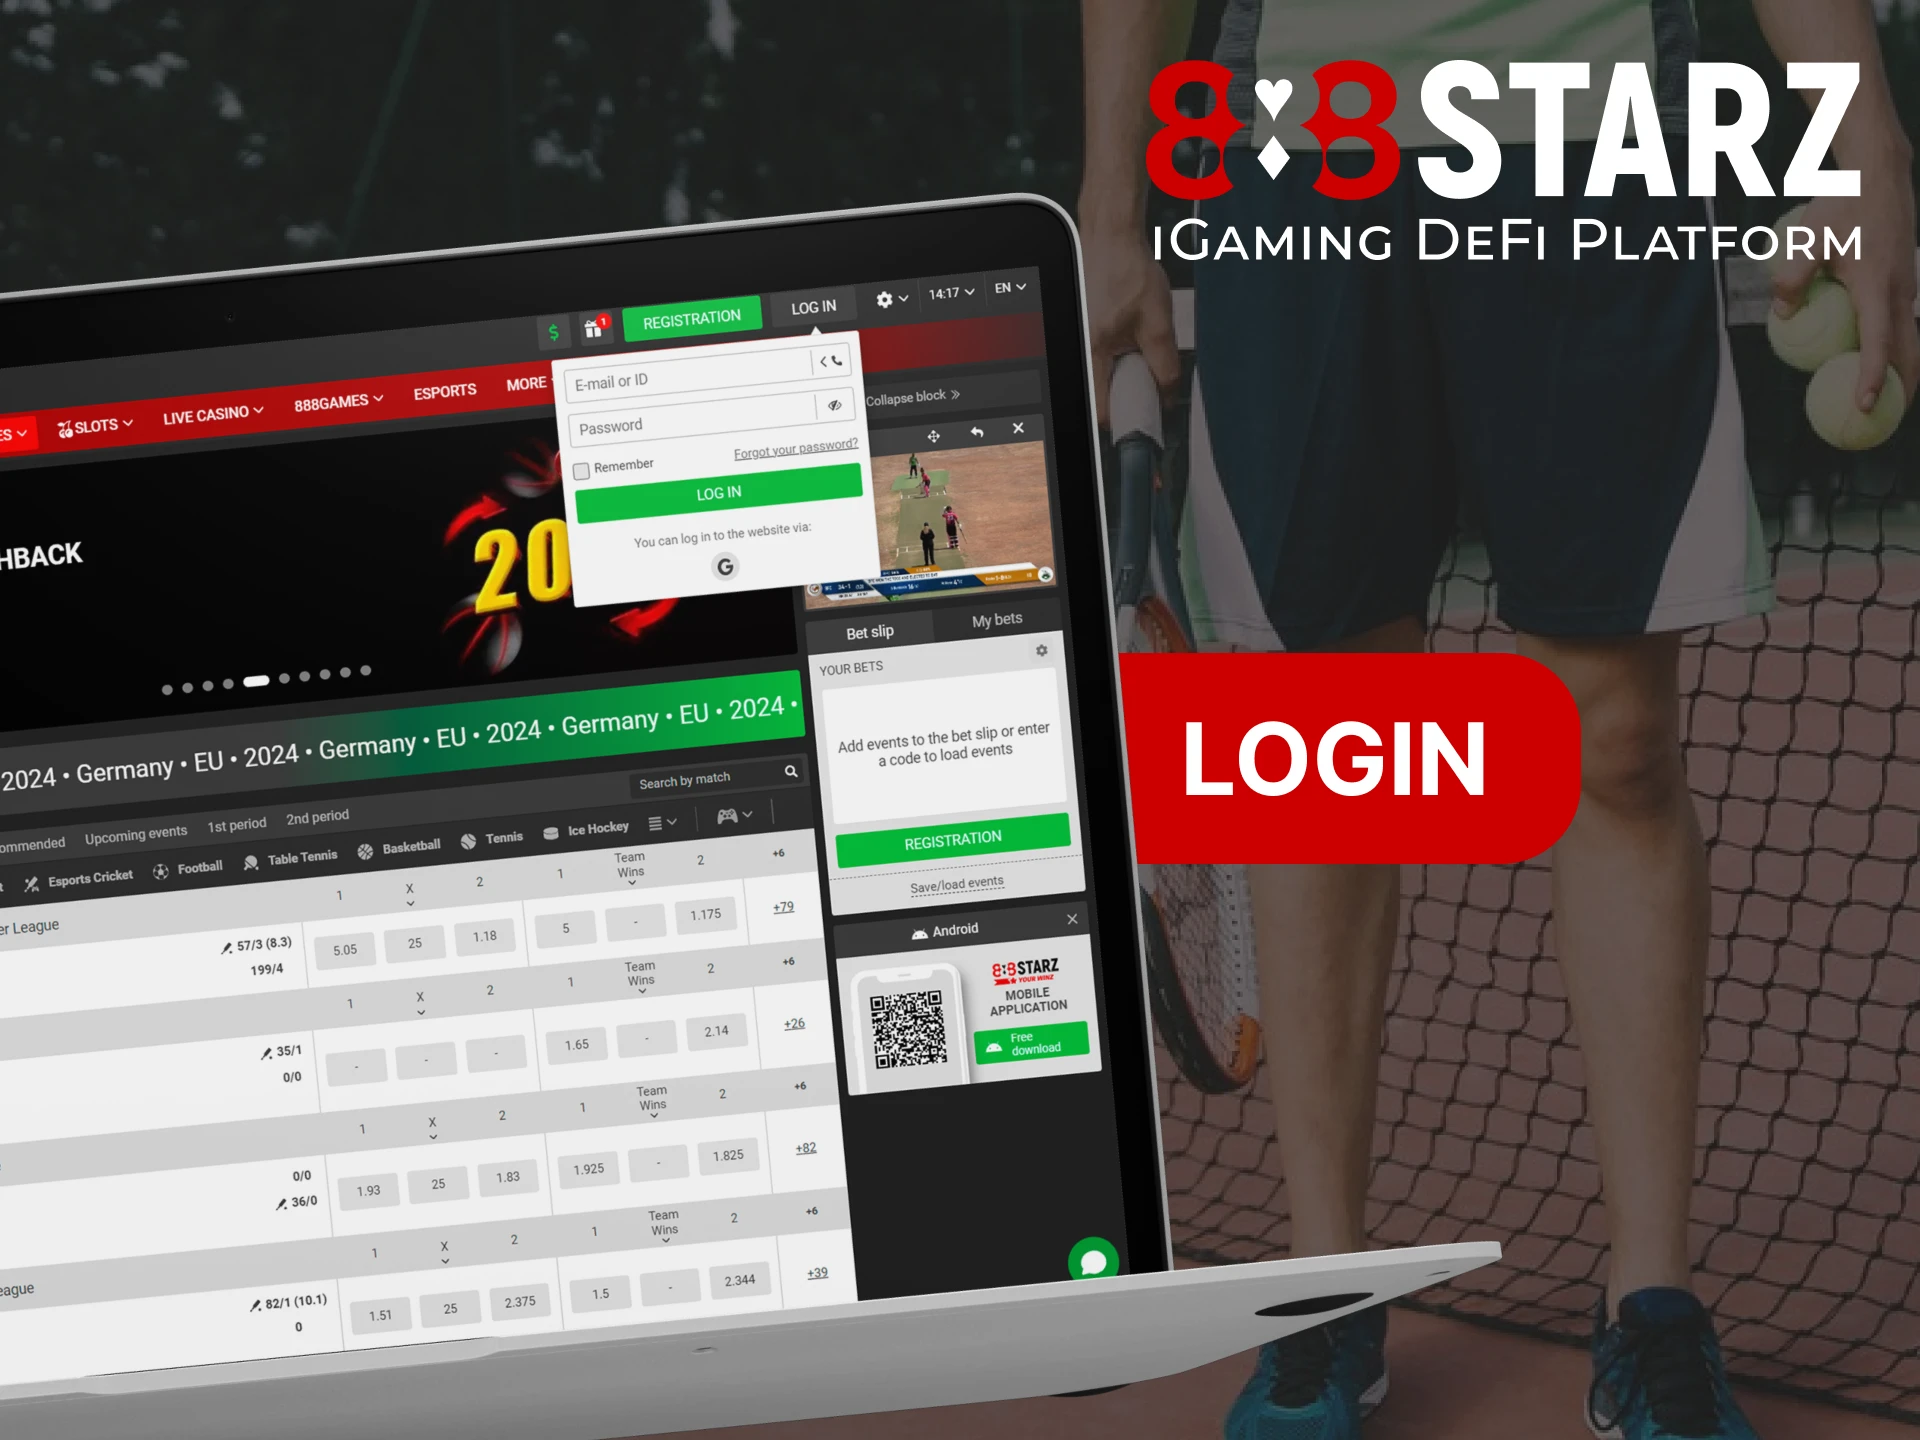 Creating a second account on 888Starz is not allowed, please log into your existing account.